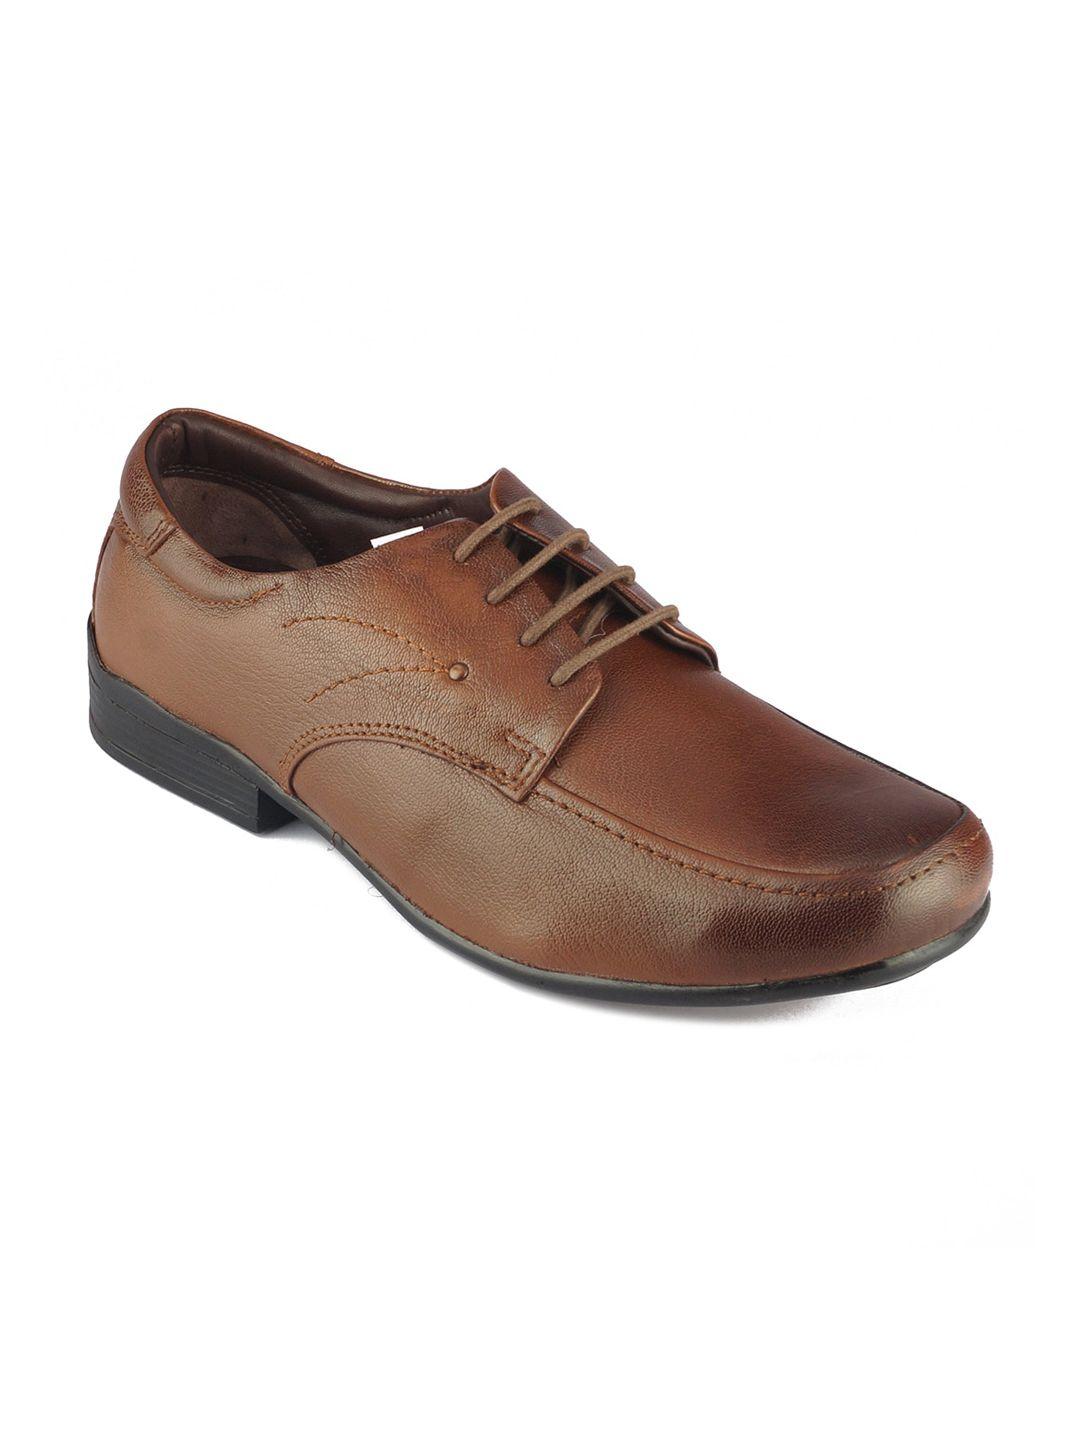 red-chief-men-tan-brown-solid-leather-formal-derbys